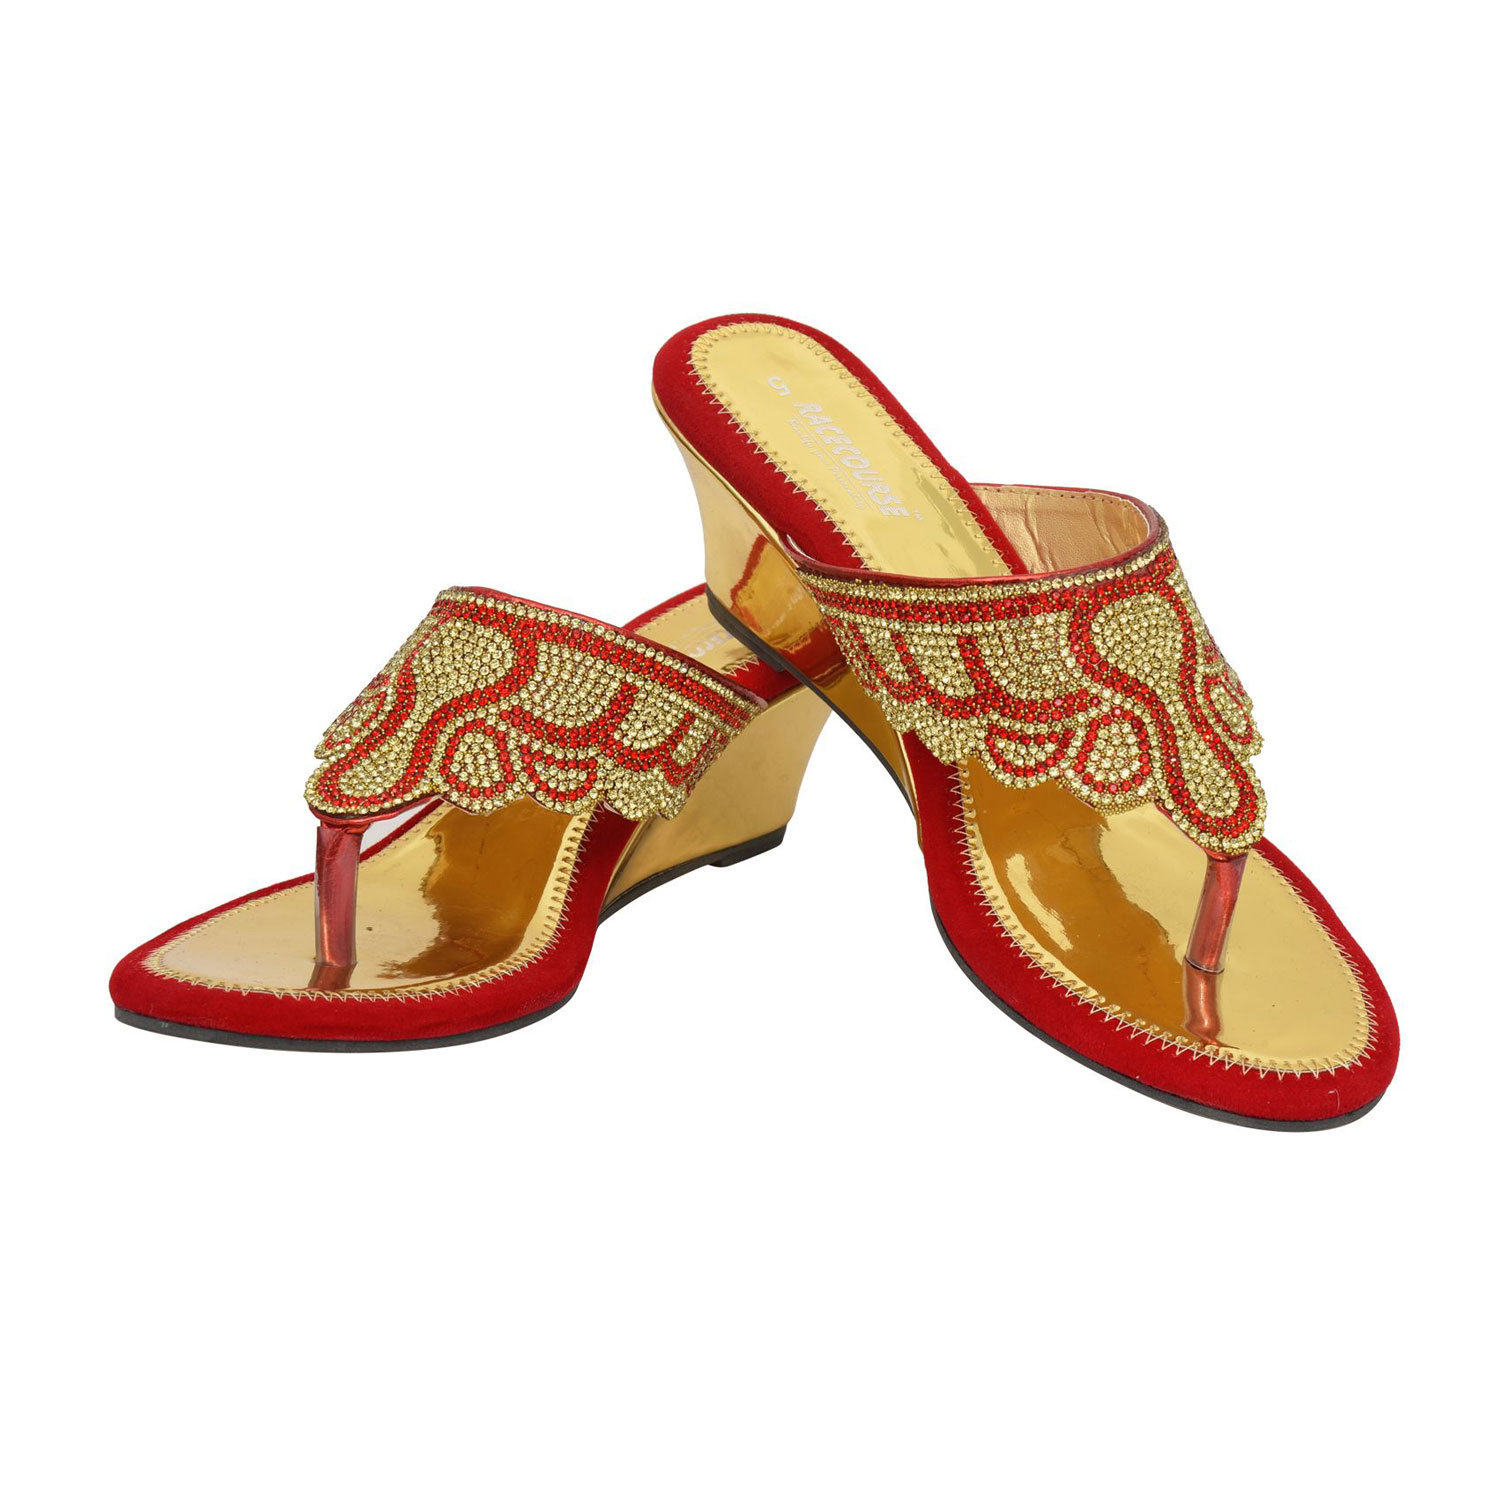 Racecourse Women's Titanic Heel Beige Sheet Ready Made Upper Taj Barmish With the Heel Height of 2.5 Inch 0022 Red(Pack of 6)